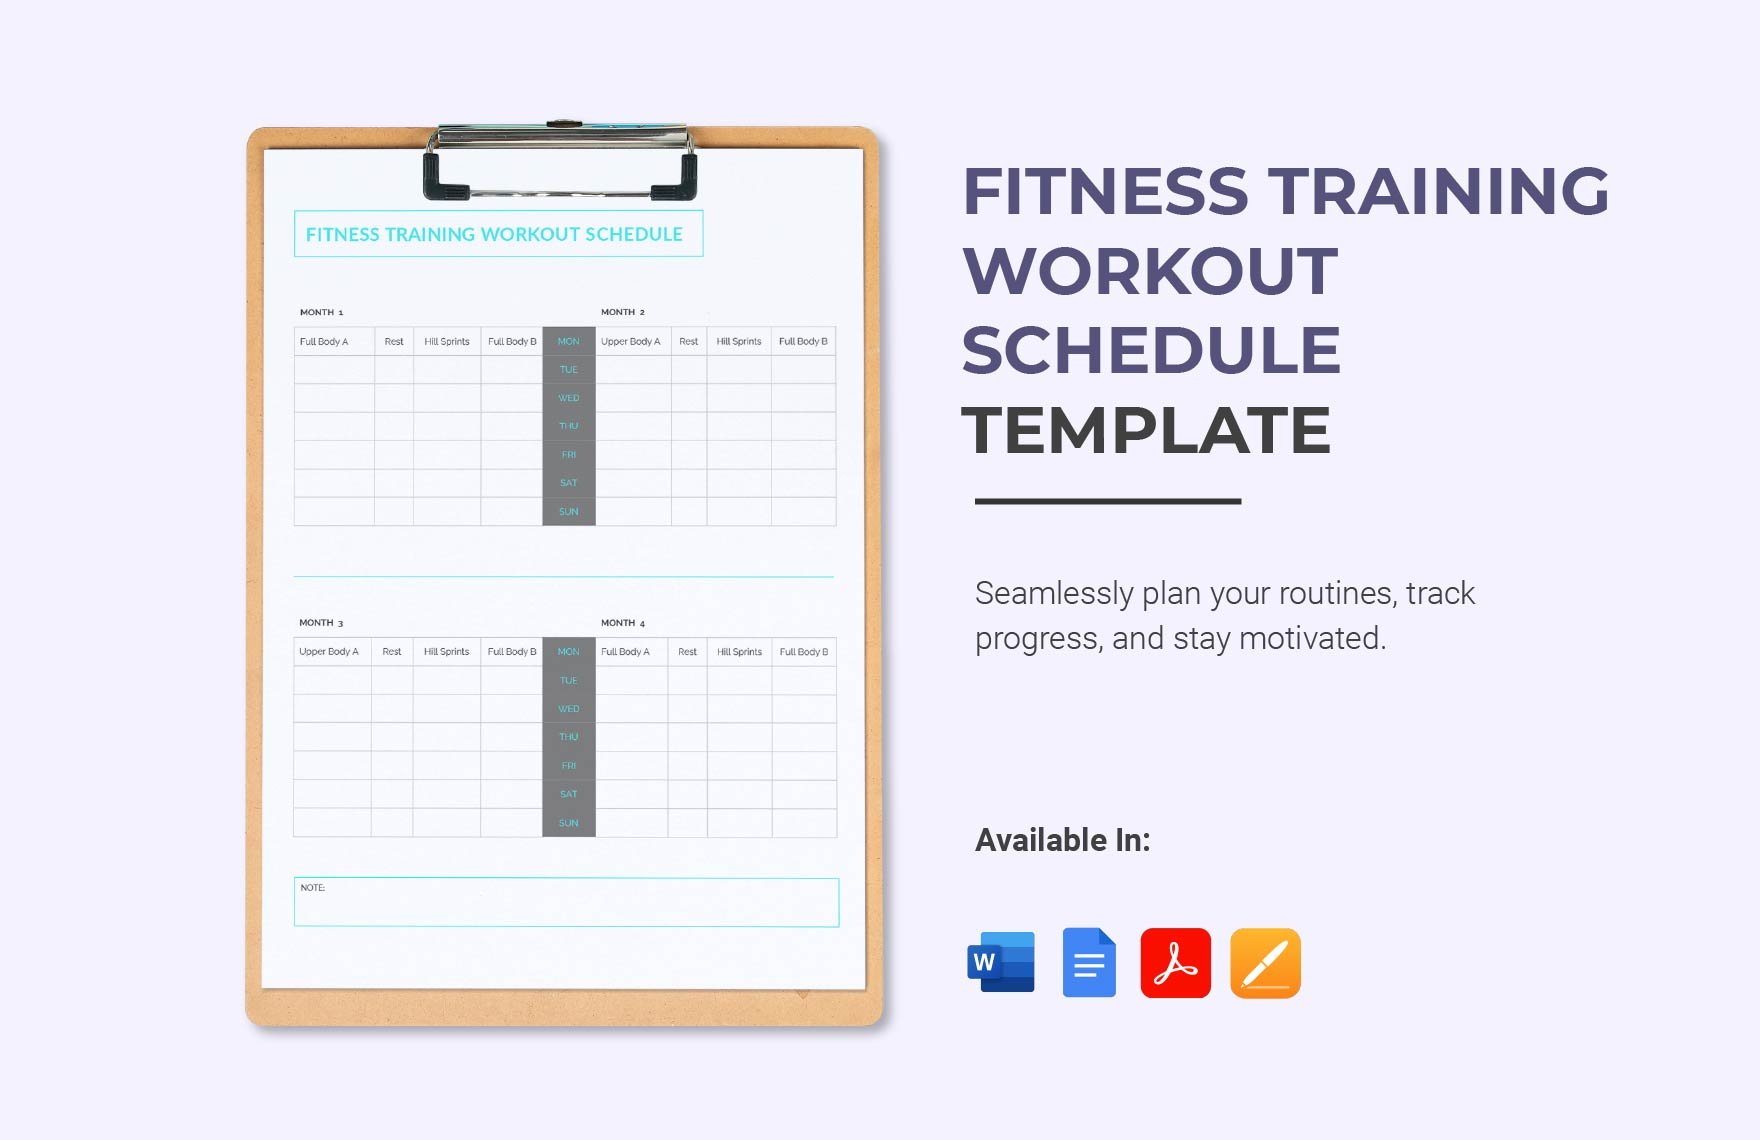 Fitness Training Workout Schedule Template